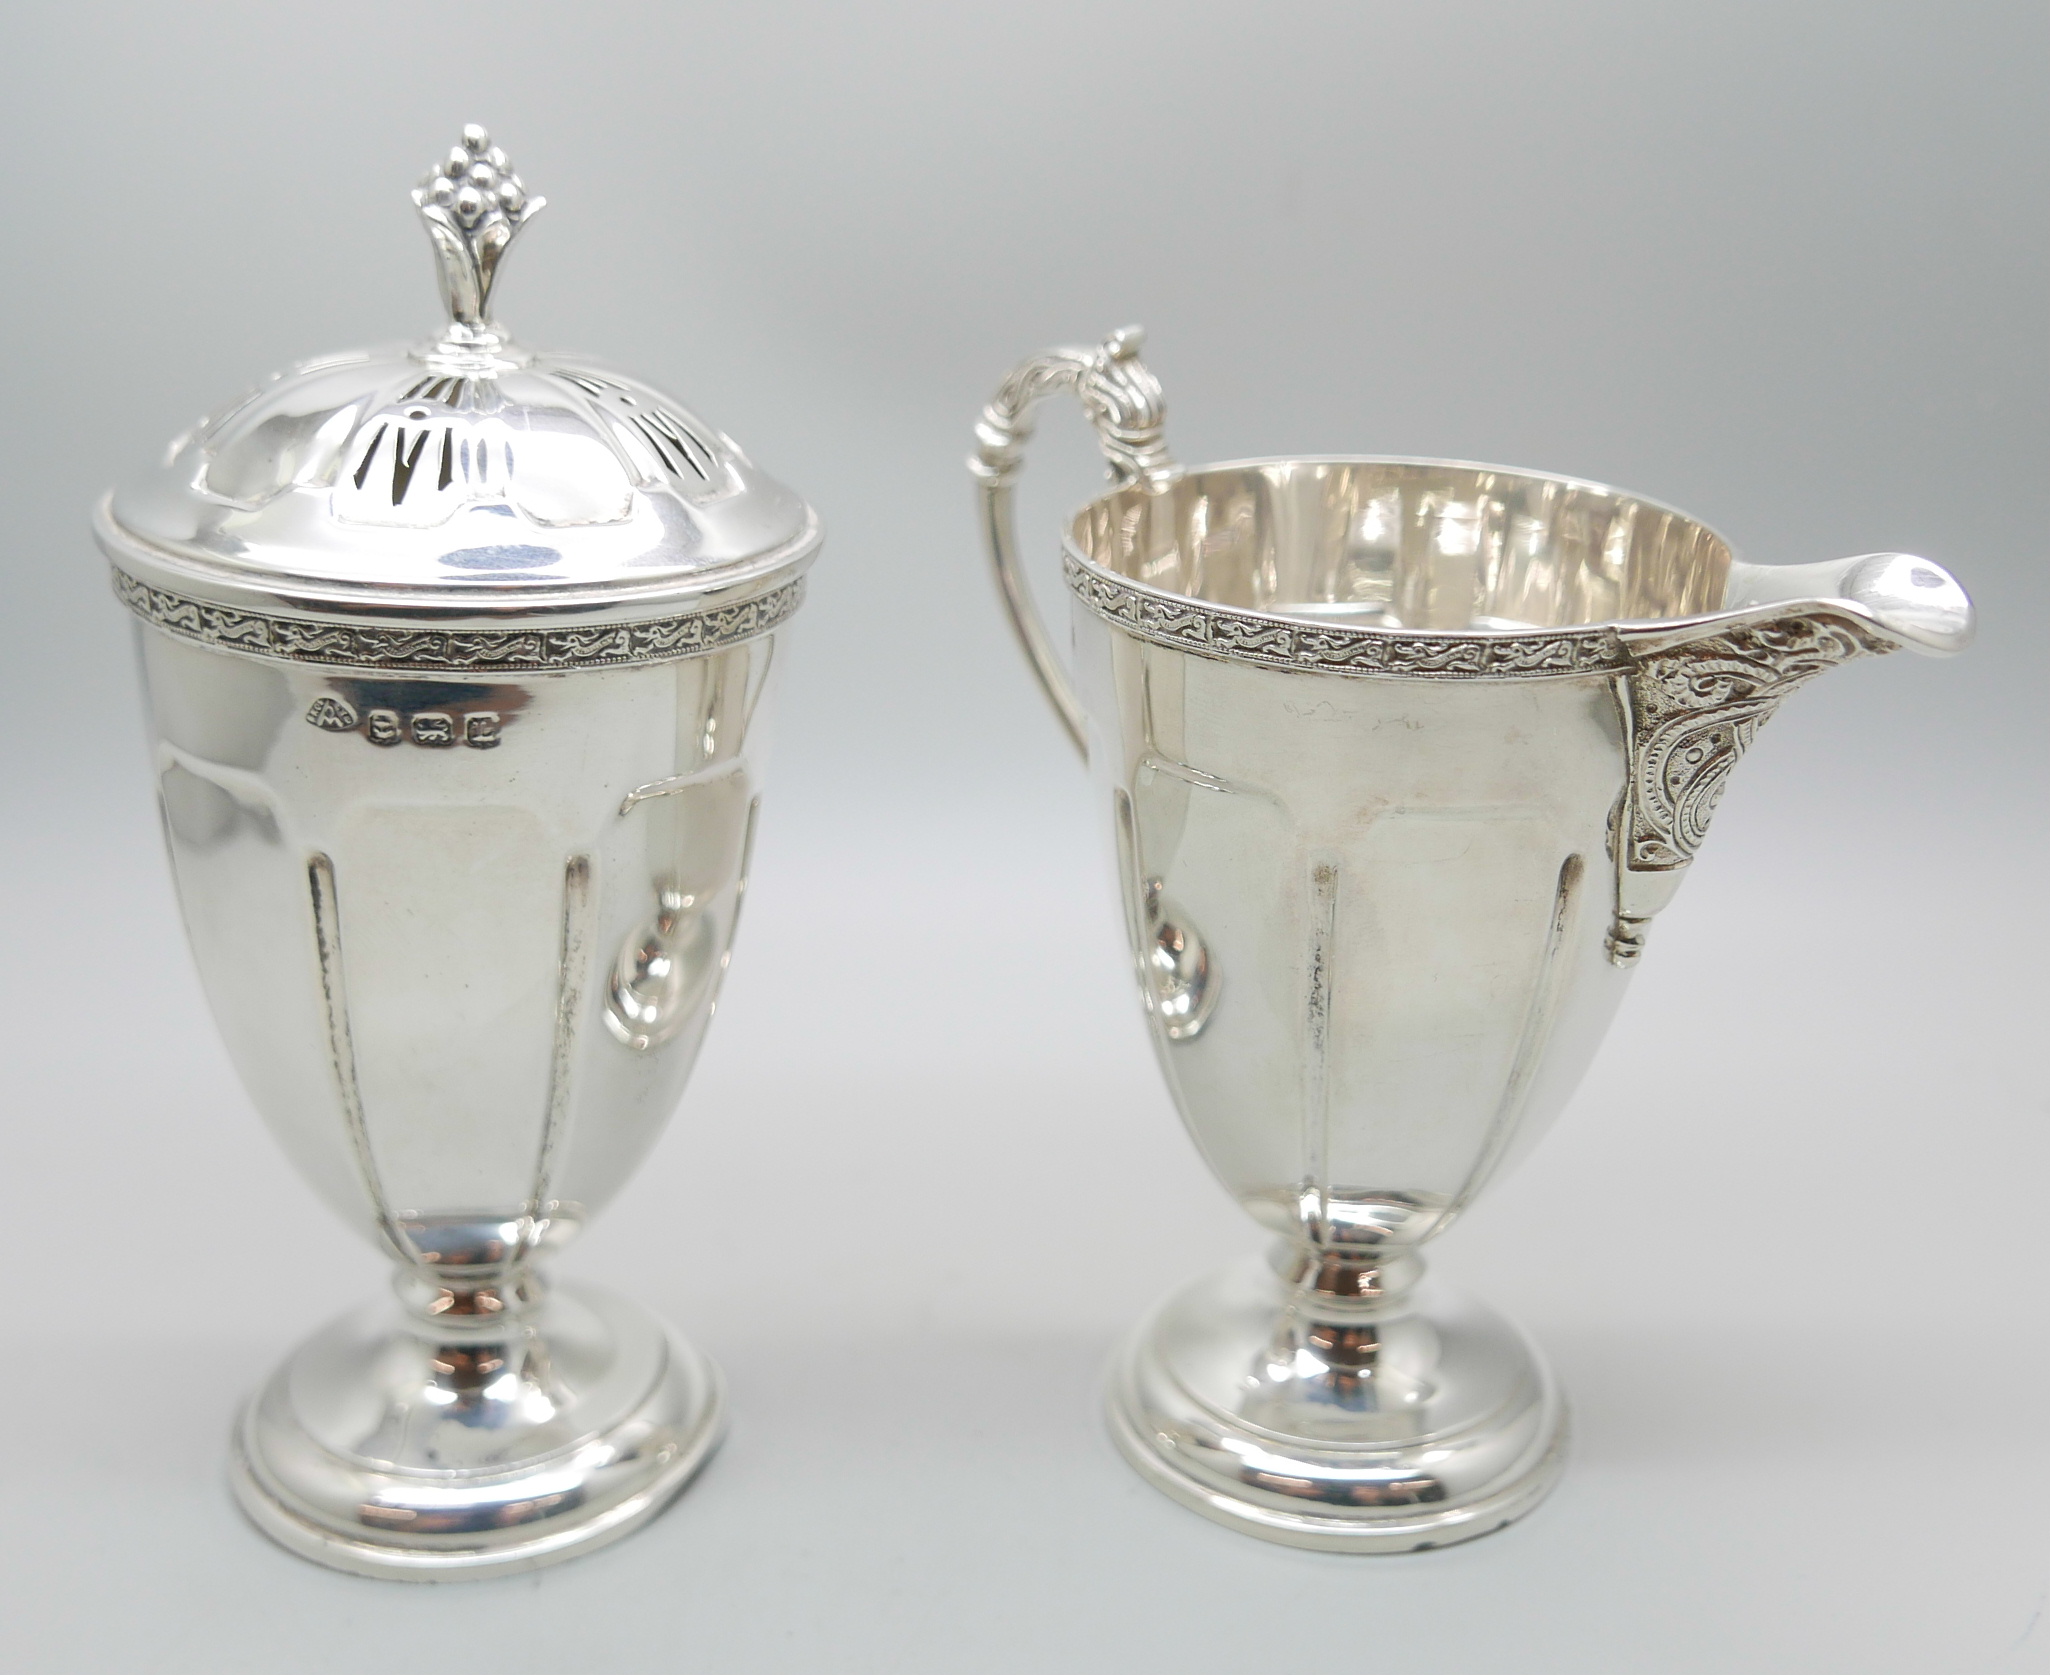 A silver cream jug and a matching sugar shaker by Adie Bros., Birmingham 1935, 207g, (both bases a/ - Image 2 of 6